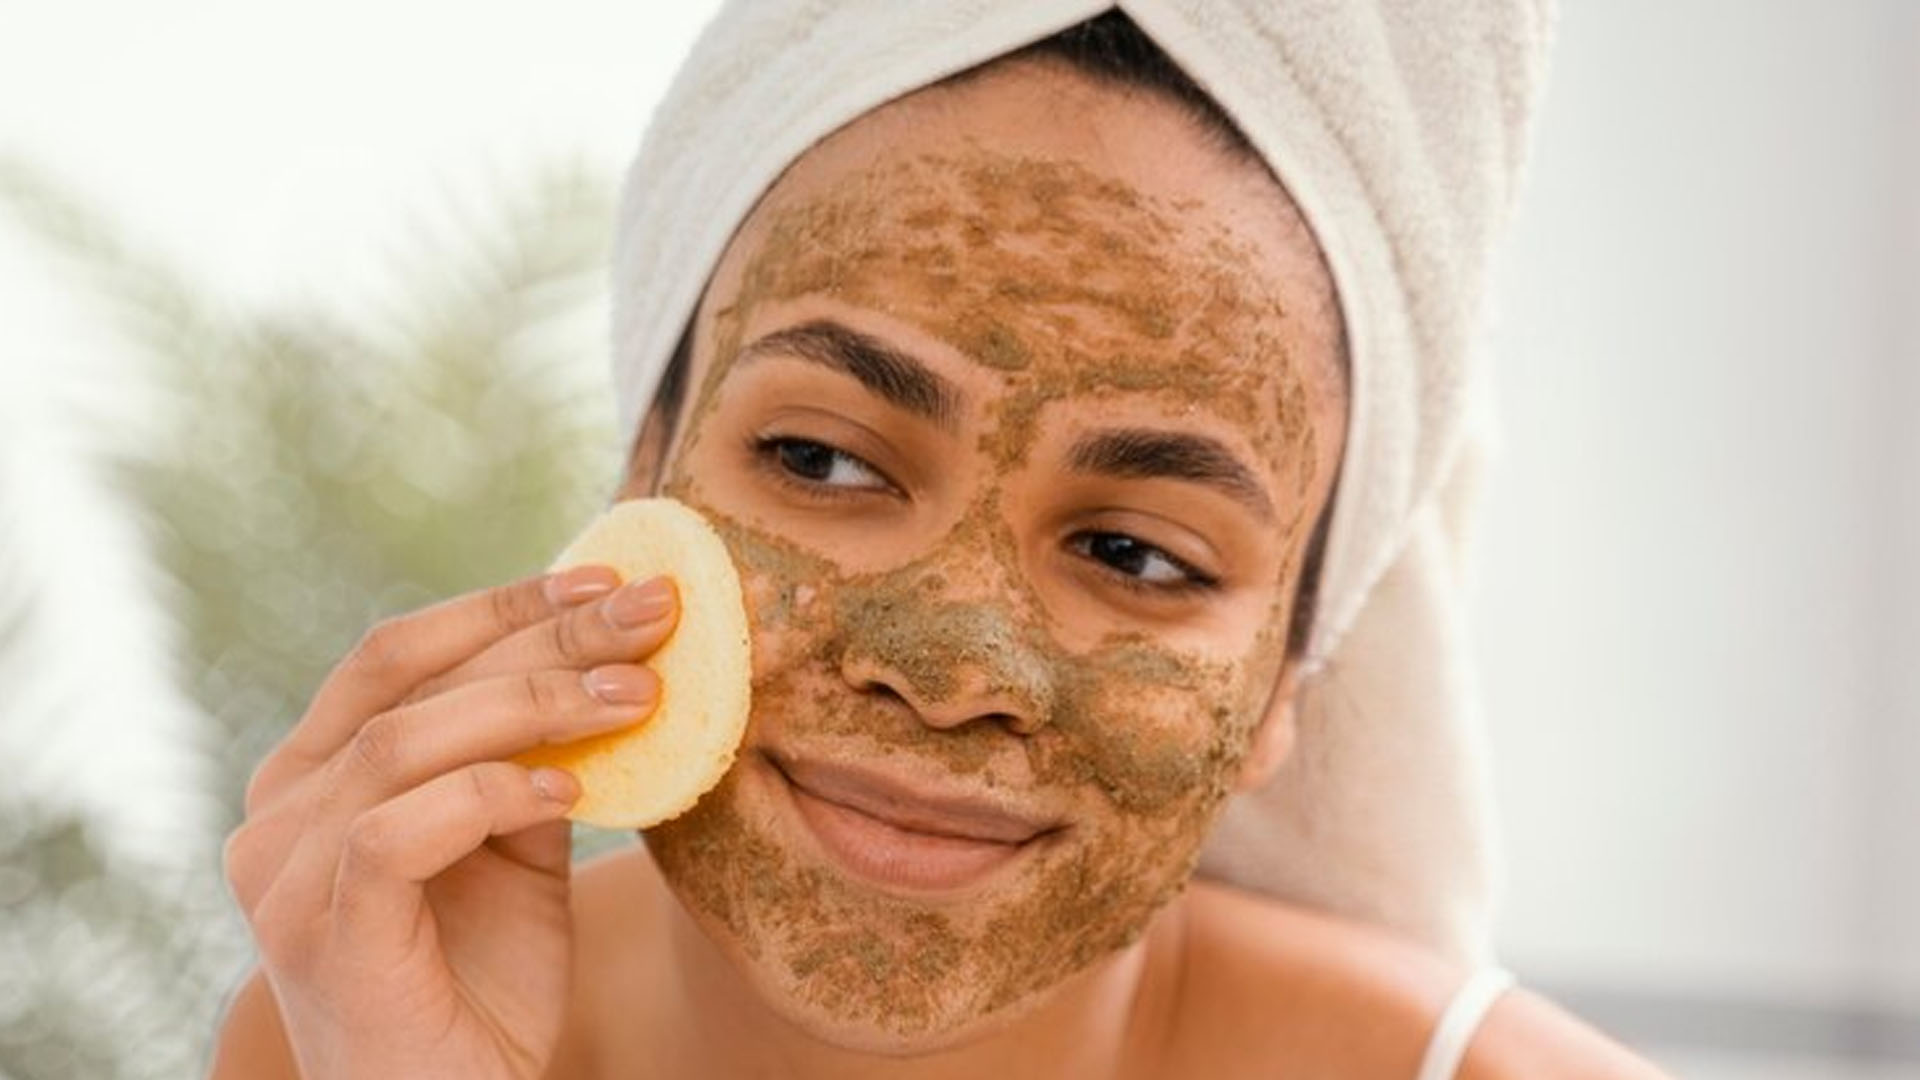 What are the Home Remedies for Face Scrub?